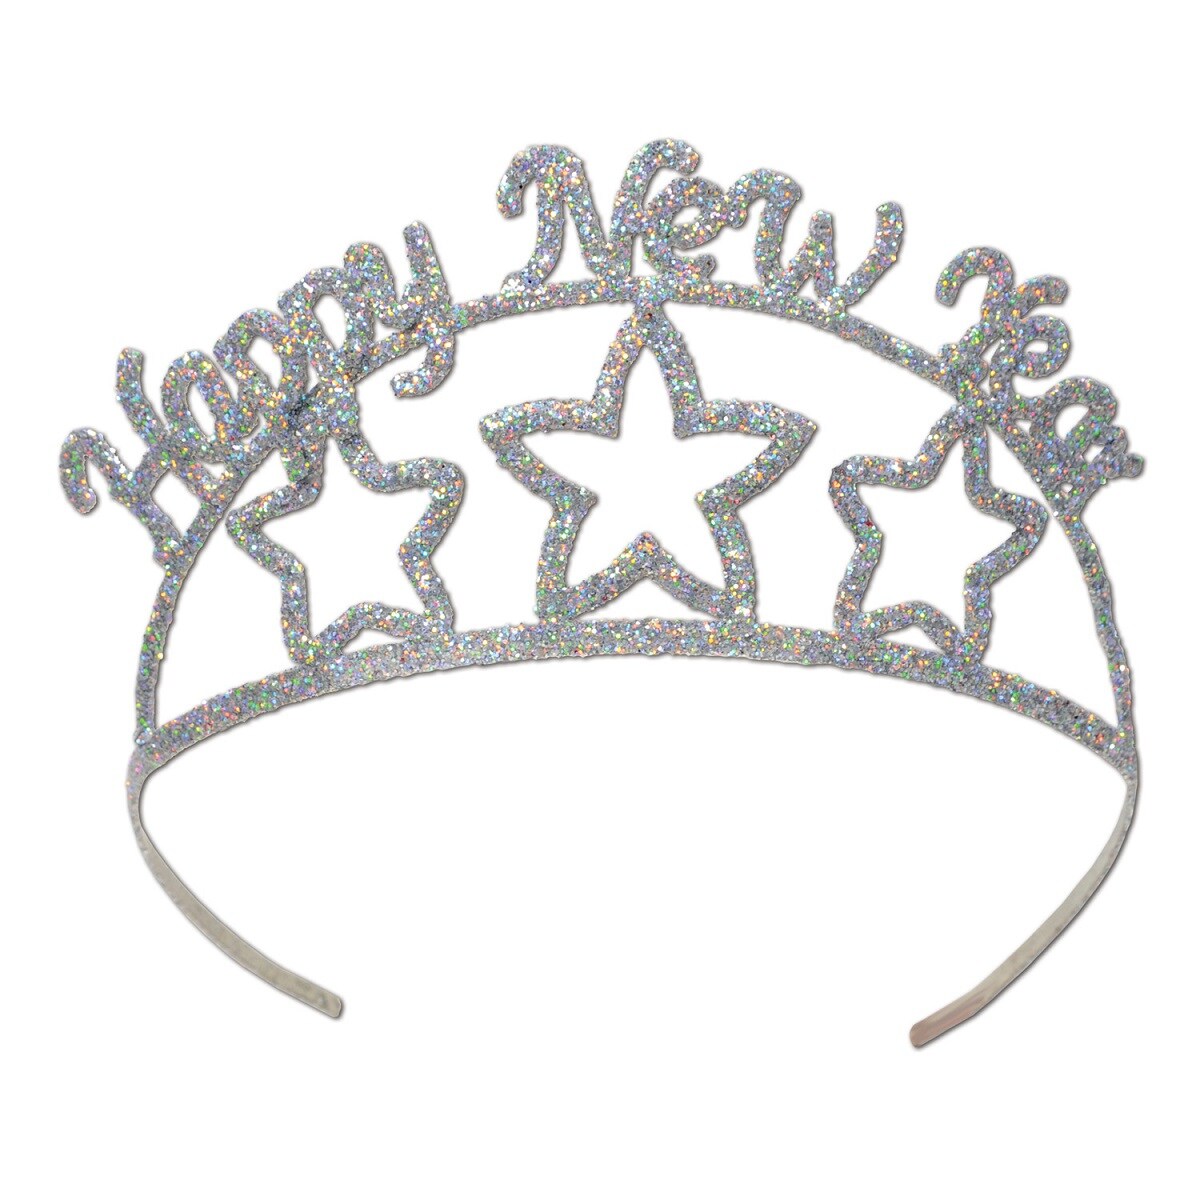 Party Central Pack of 6 Silver Glittered Star Happy New Year Decorative Party Tiaras